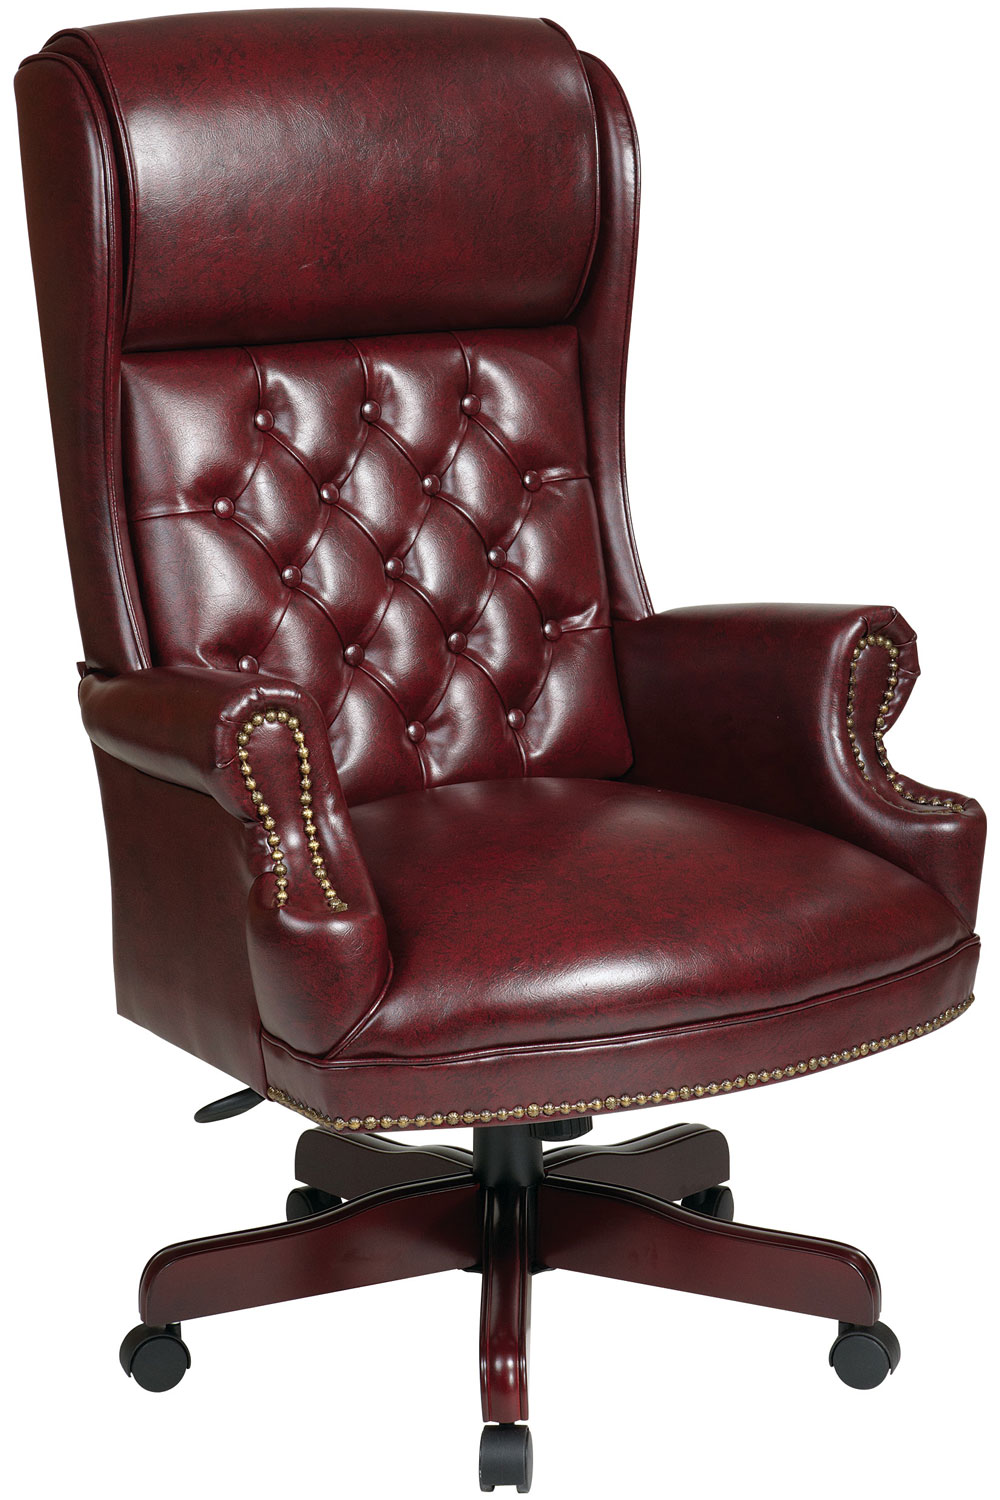 leather executive office chair high back ... office star deluxe high back traditional executive chair best JFOTSUE